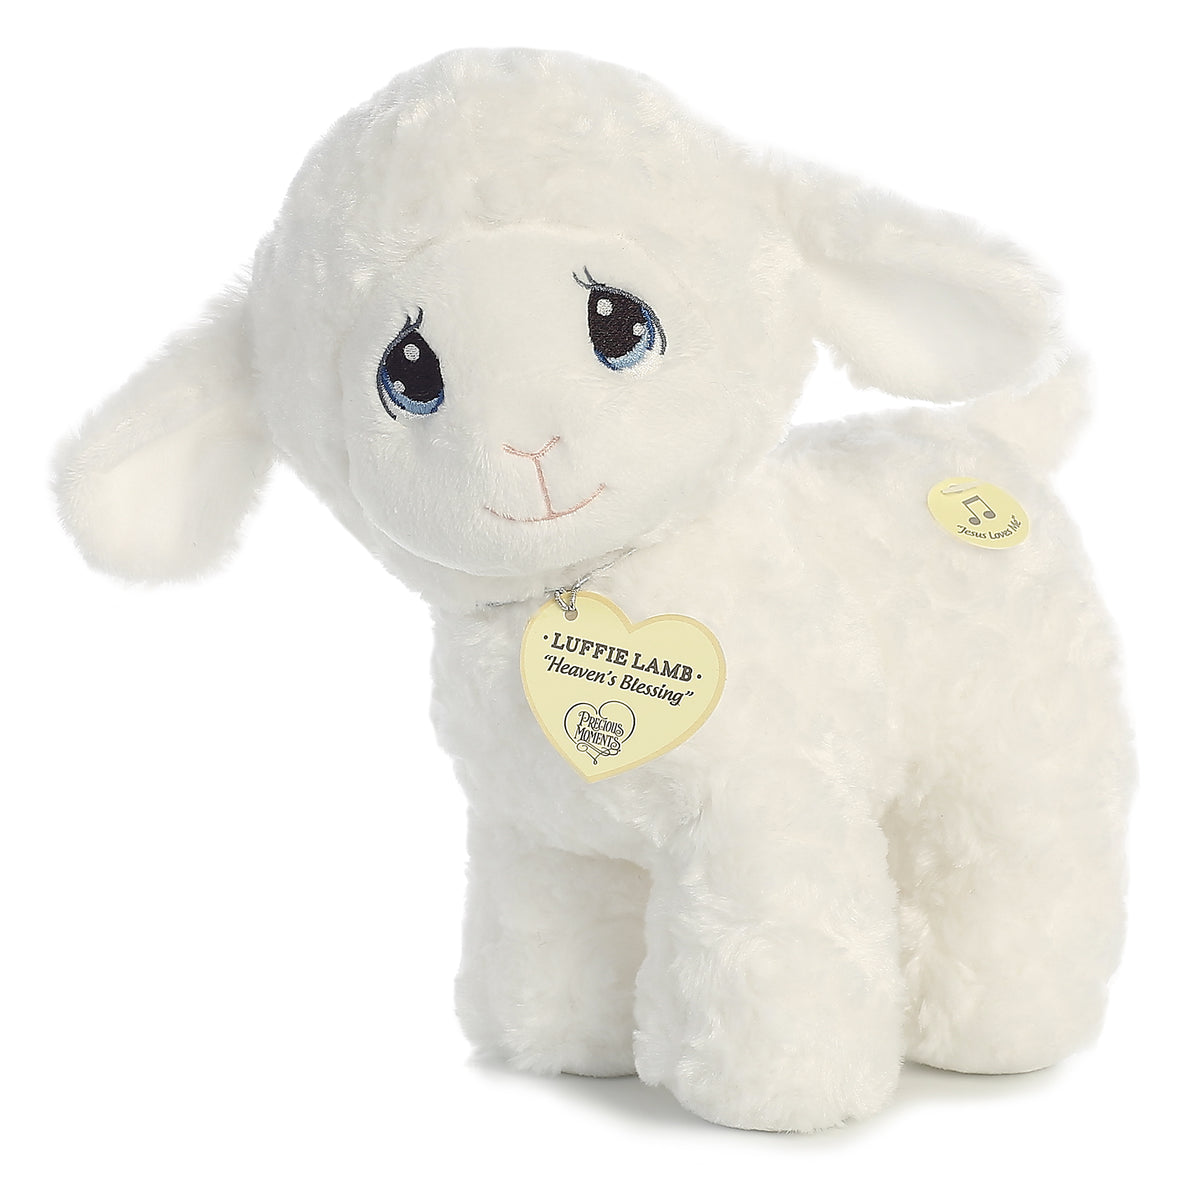 A lamb plush with tear-drop eyes, cloud-like white fur, and a precious moments inspirational tag on its neck.